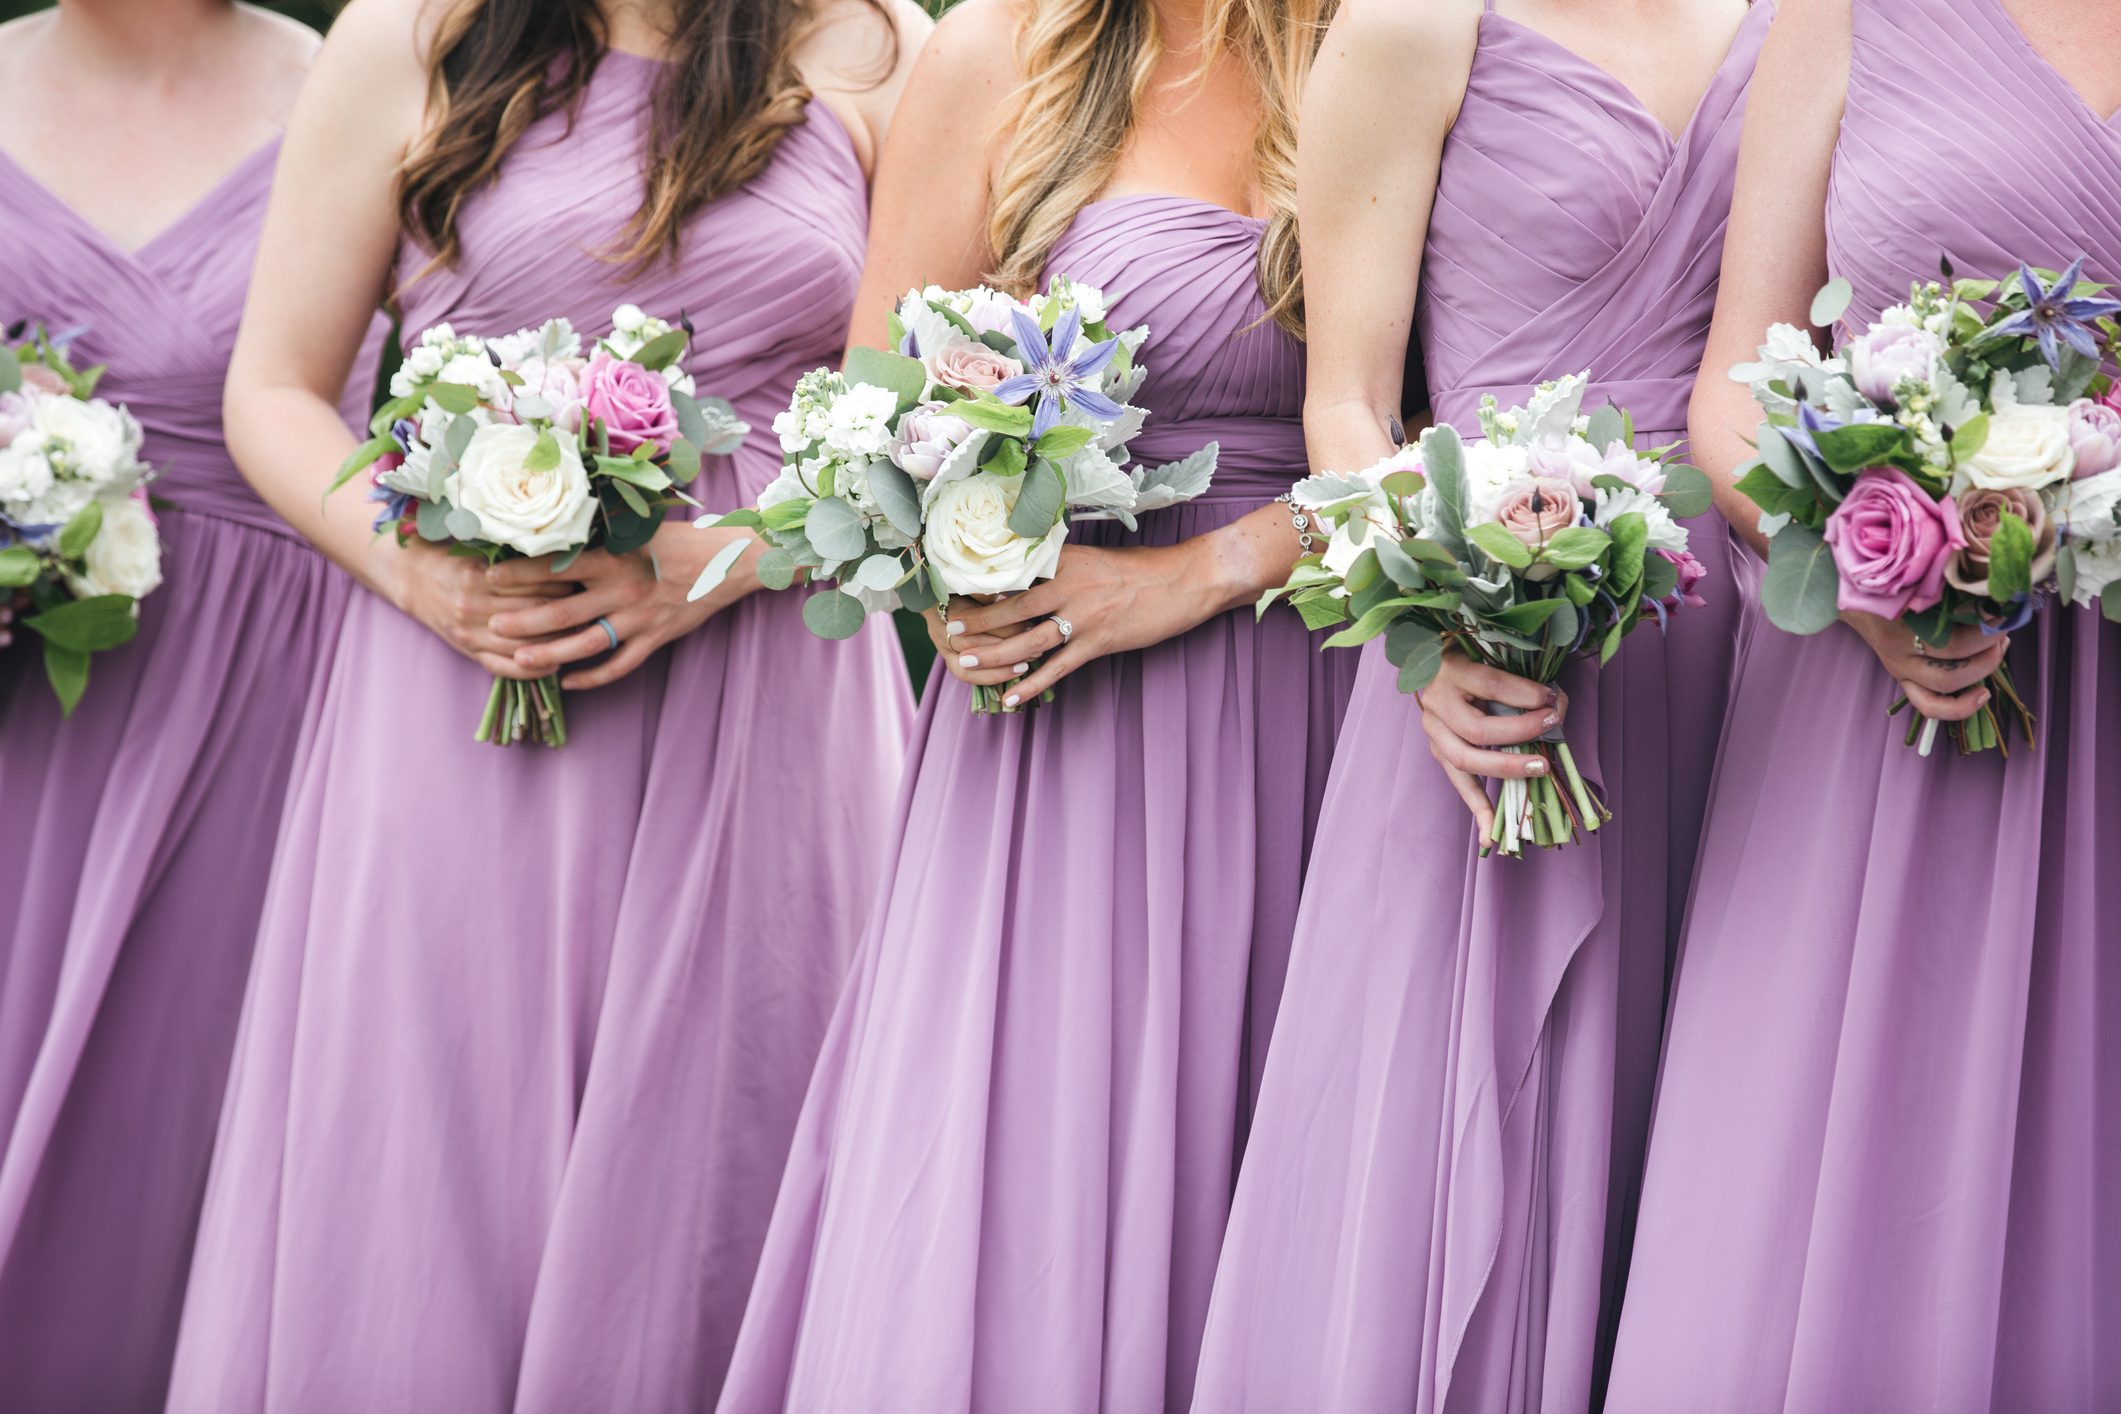 Close up of bridal party with floral bouquets